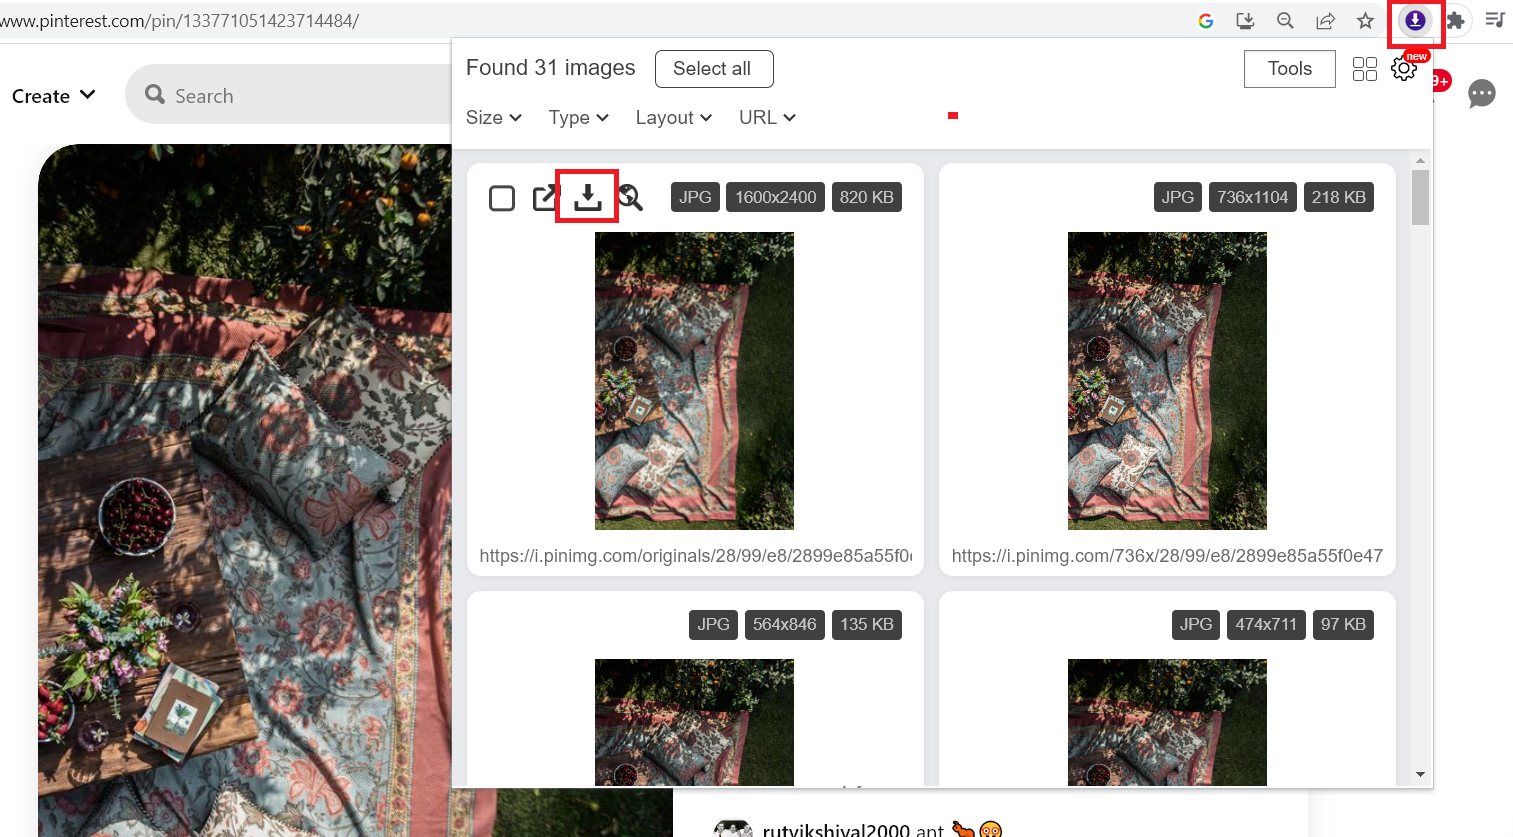 Download high quality photos from Pinterest with Chrome extension